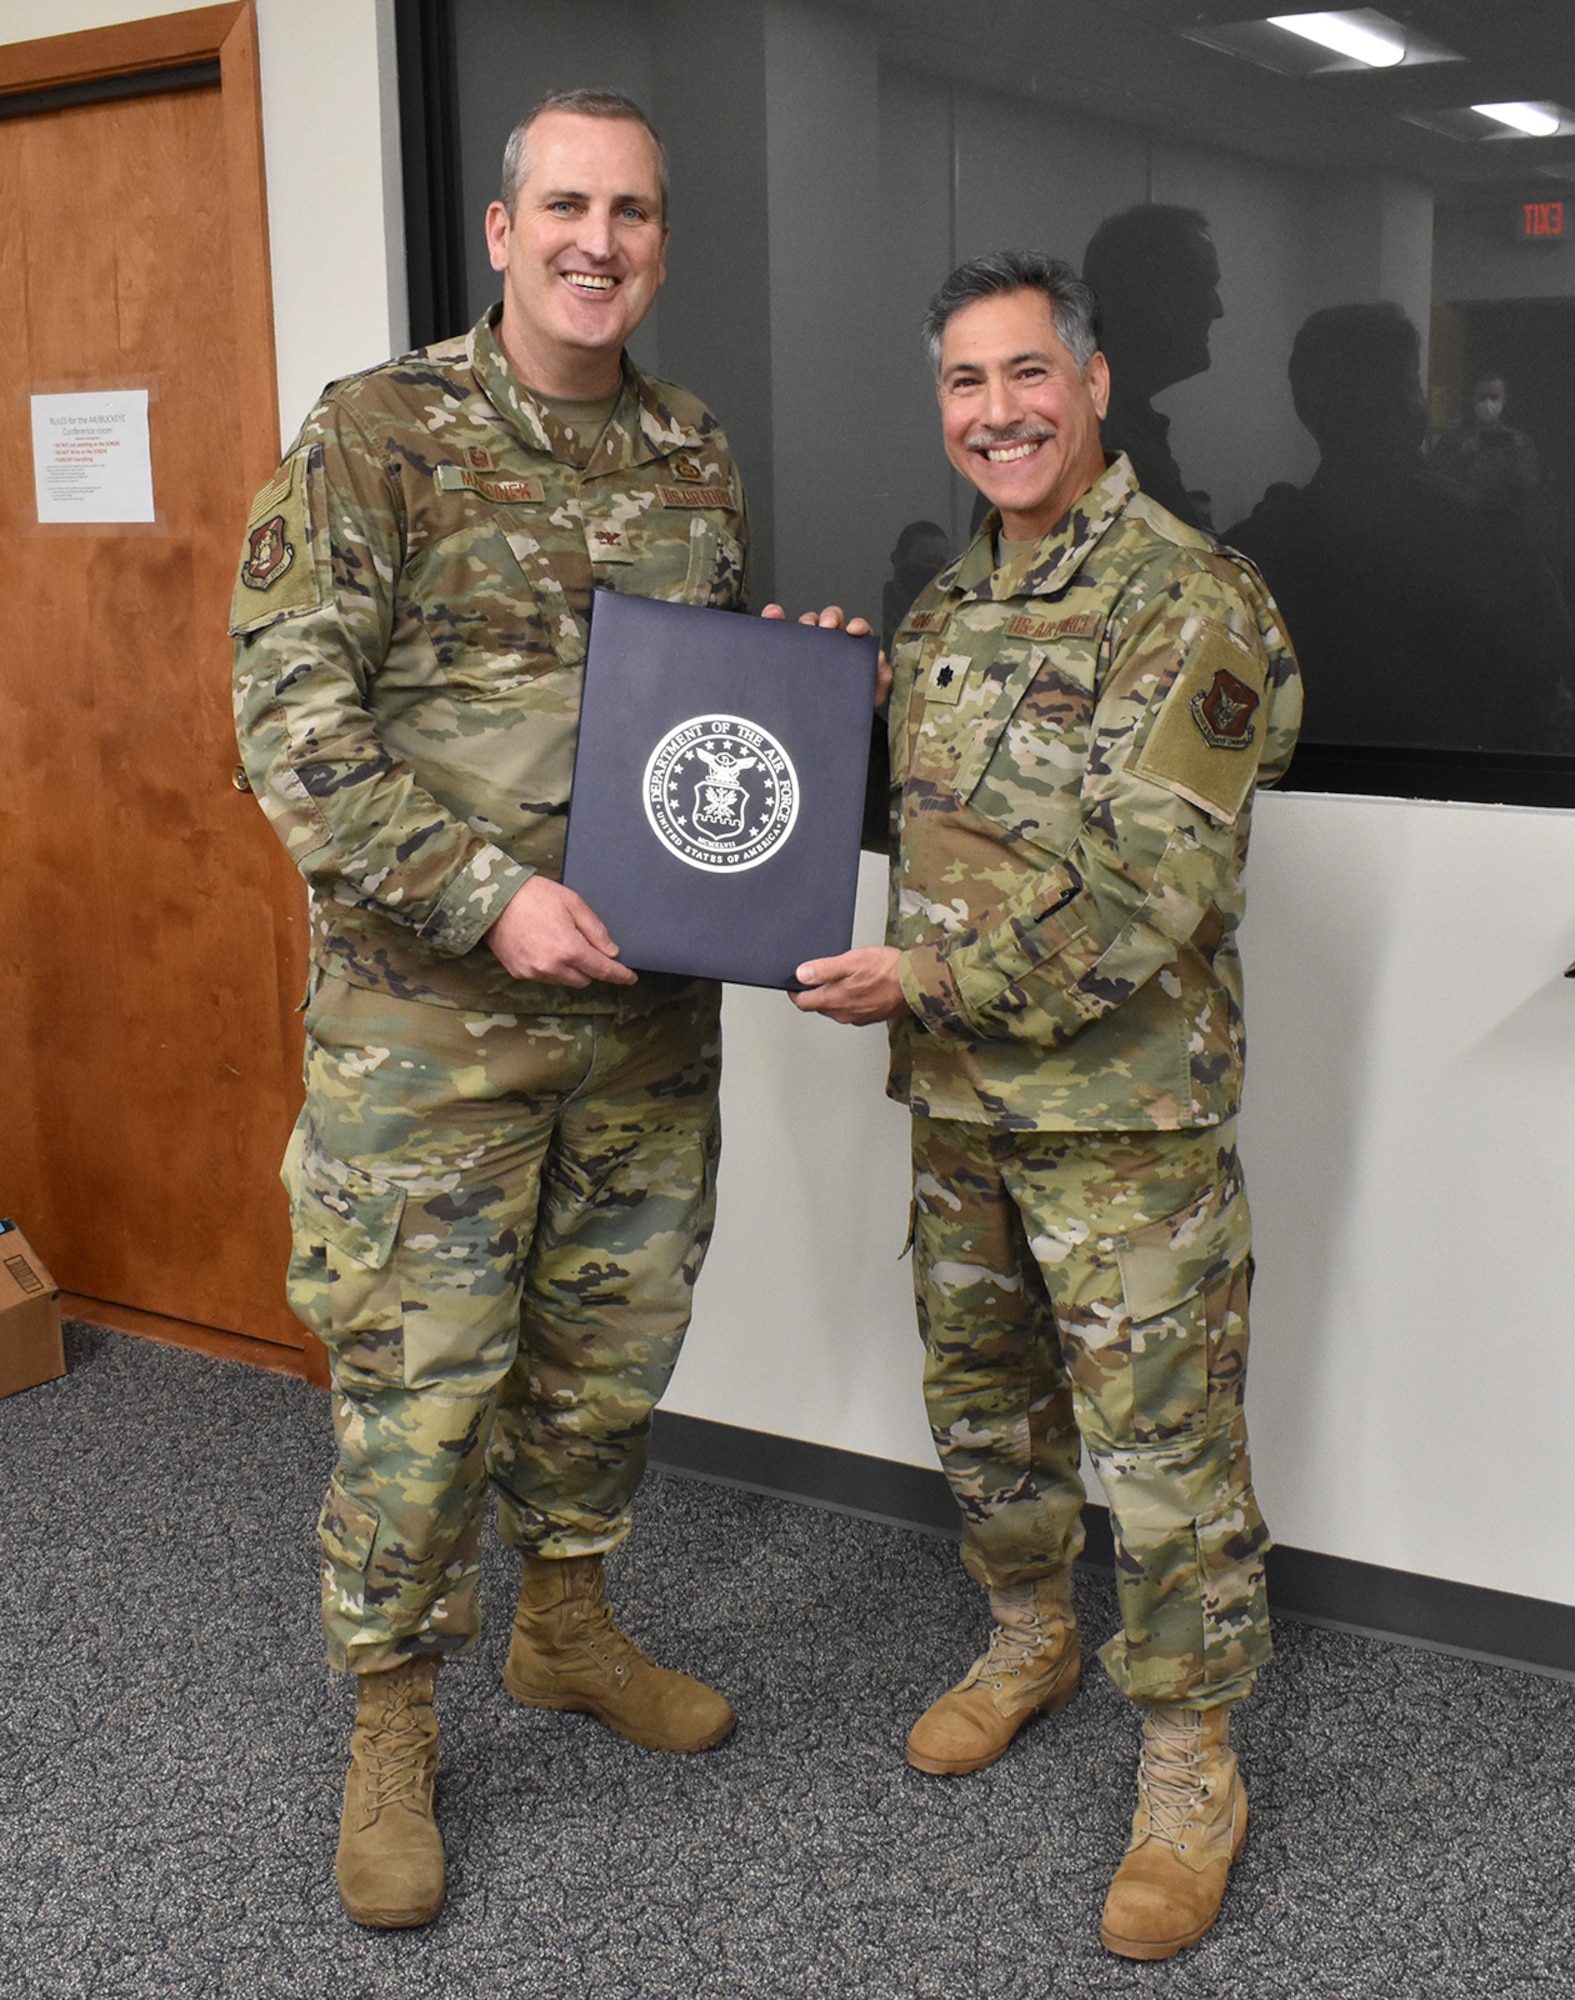 Col. Joseph Marcinek, 655th Intelligence, Surveillance, and Reconnaissance Wing commander, presents Lt. Col. Thomas Danas, 655th ISR Group deputy commander, his retirement certificate during the Dec. 5, 2020 unit training assembly. Danas has held multiple positions within the enterprise since 2013 with both the 16 Intelligence Squadron and 655 ISRG and is retiring after more than 41 years of service; over 20 years enlisted and over 20 years as an officer.